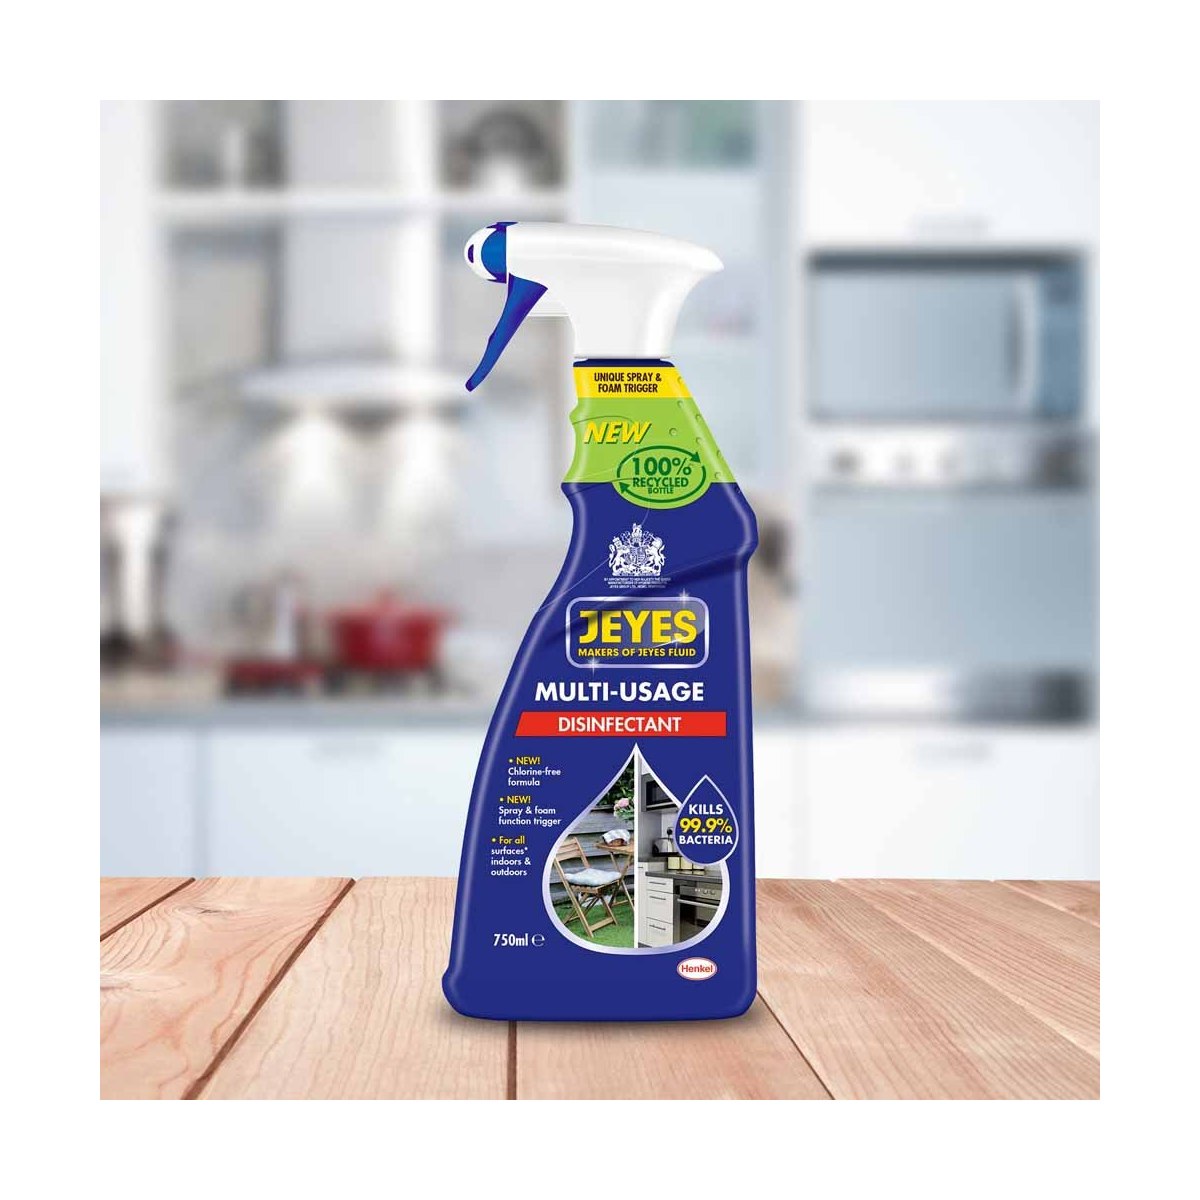 Jeyes Multi-Usage Disinfectant Spray